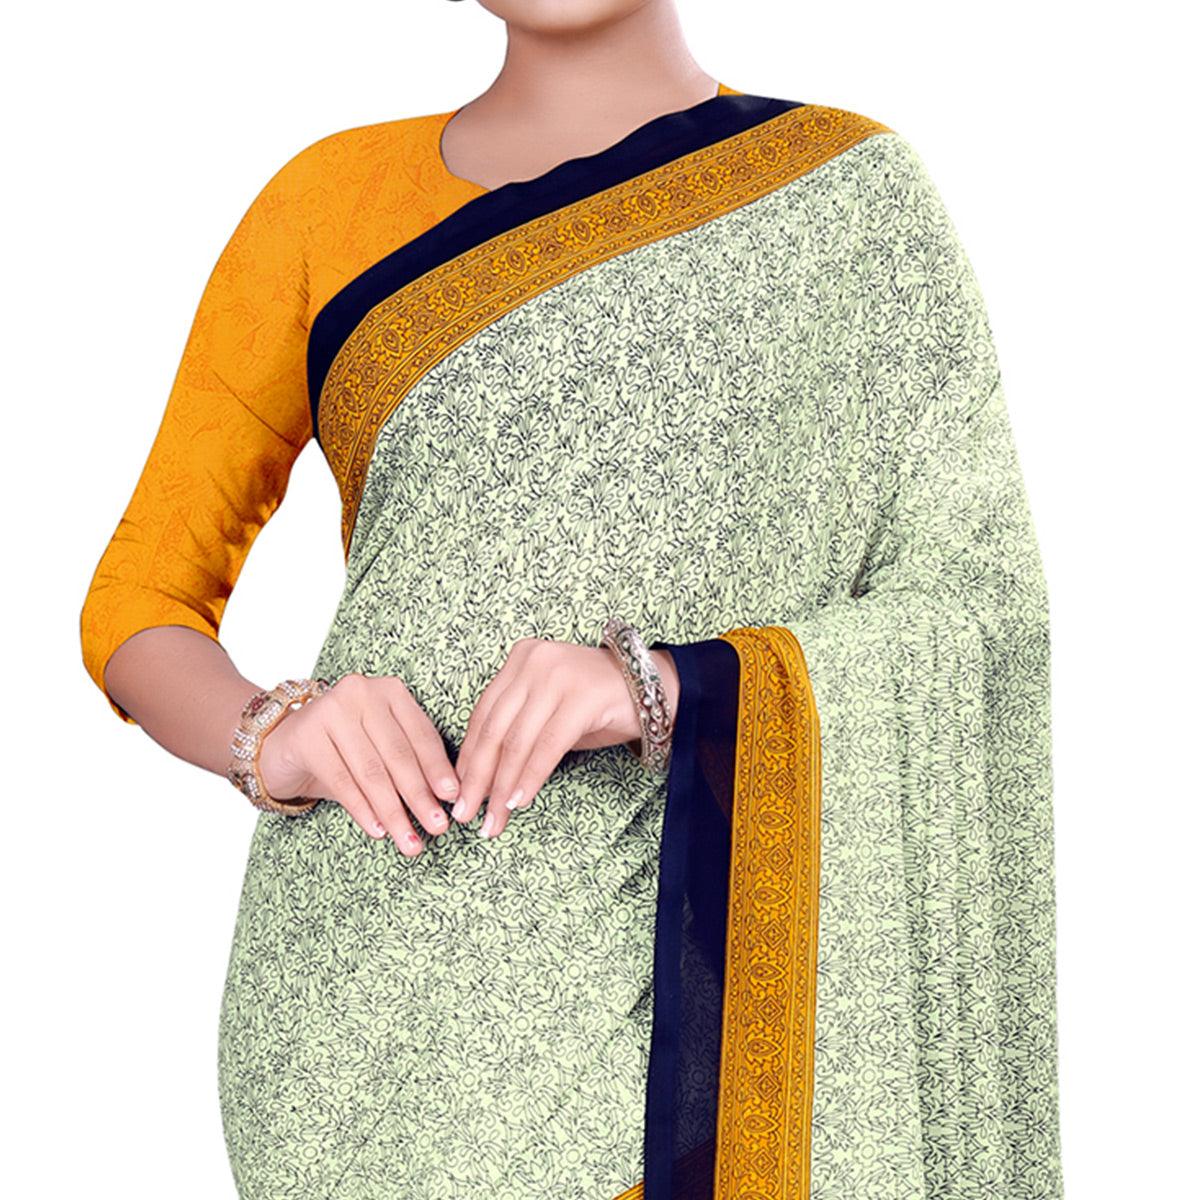 Elegant Pastel Green-Yellow Colored Casual Wear Printed Georgette Saree - Peachmode